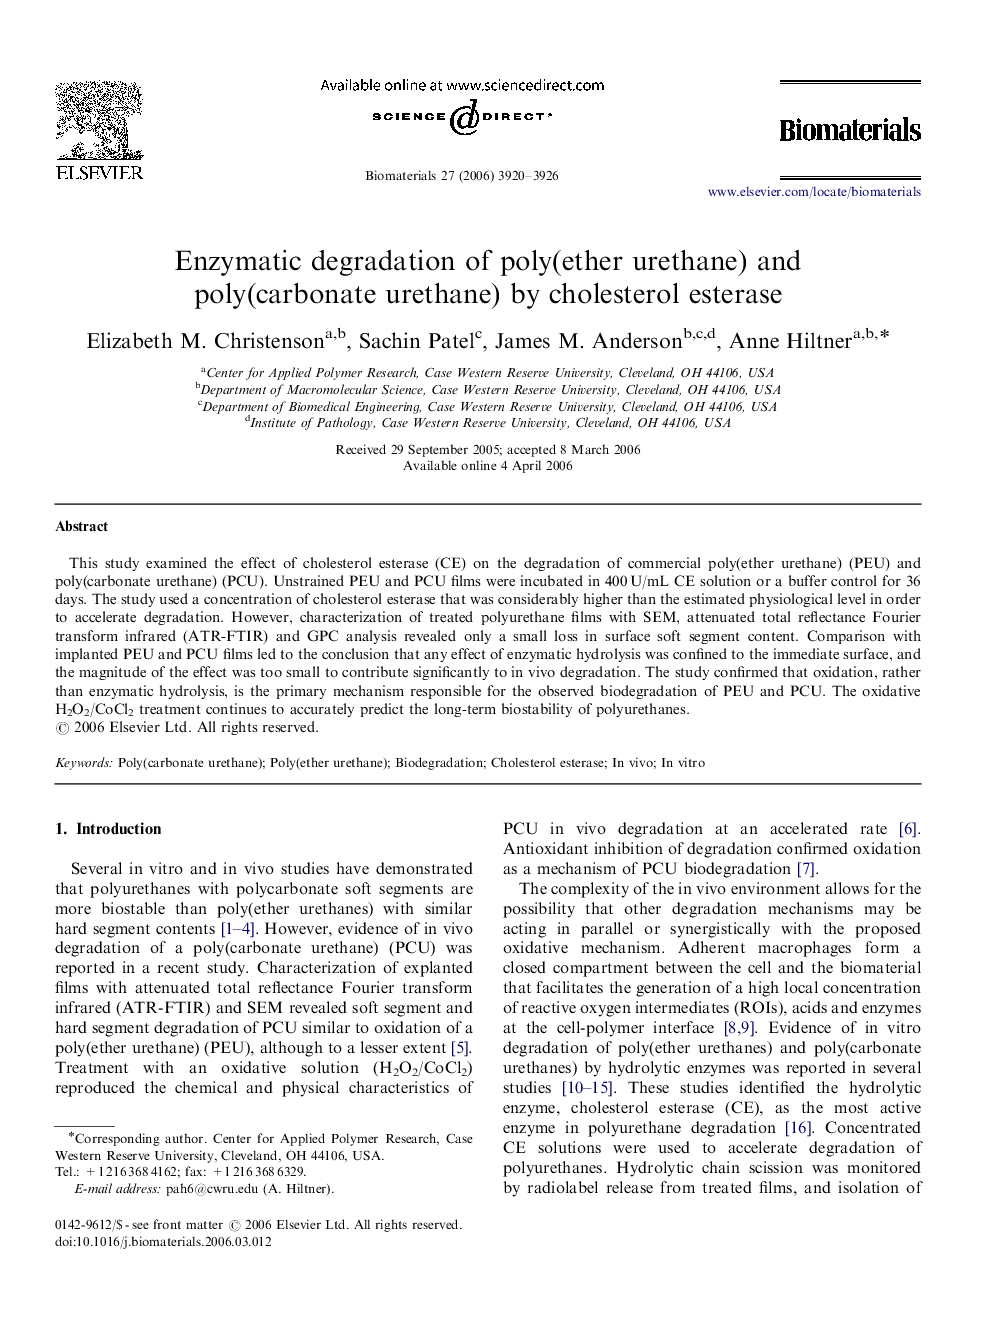 Enzymatic degradation of poly(ether urethane) and poly(carbonate urethane) by cholesterol esterase